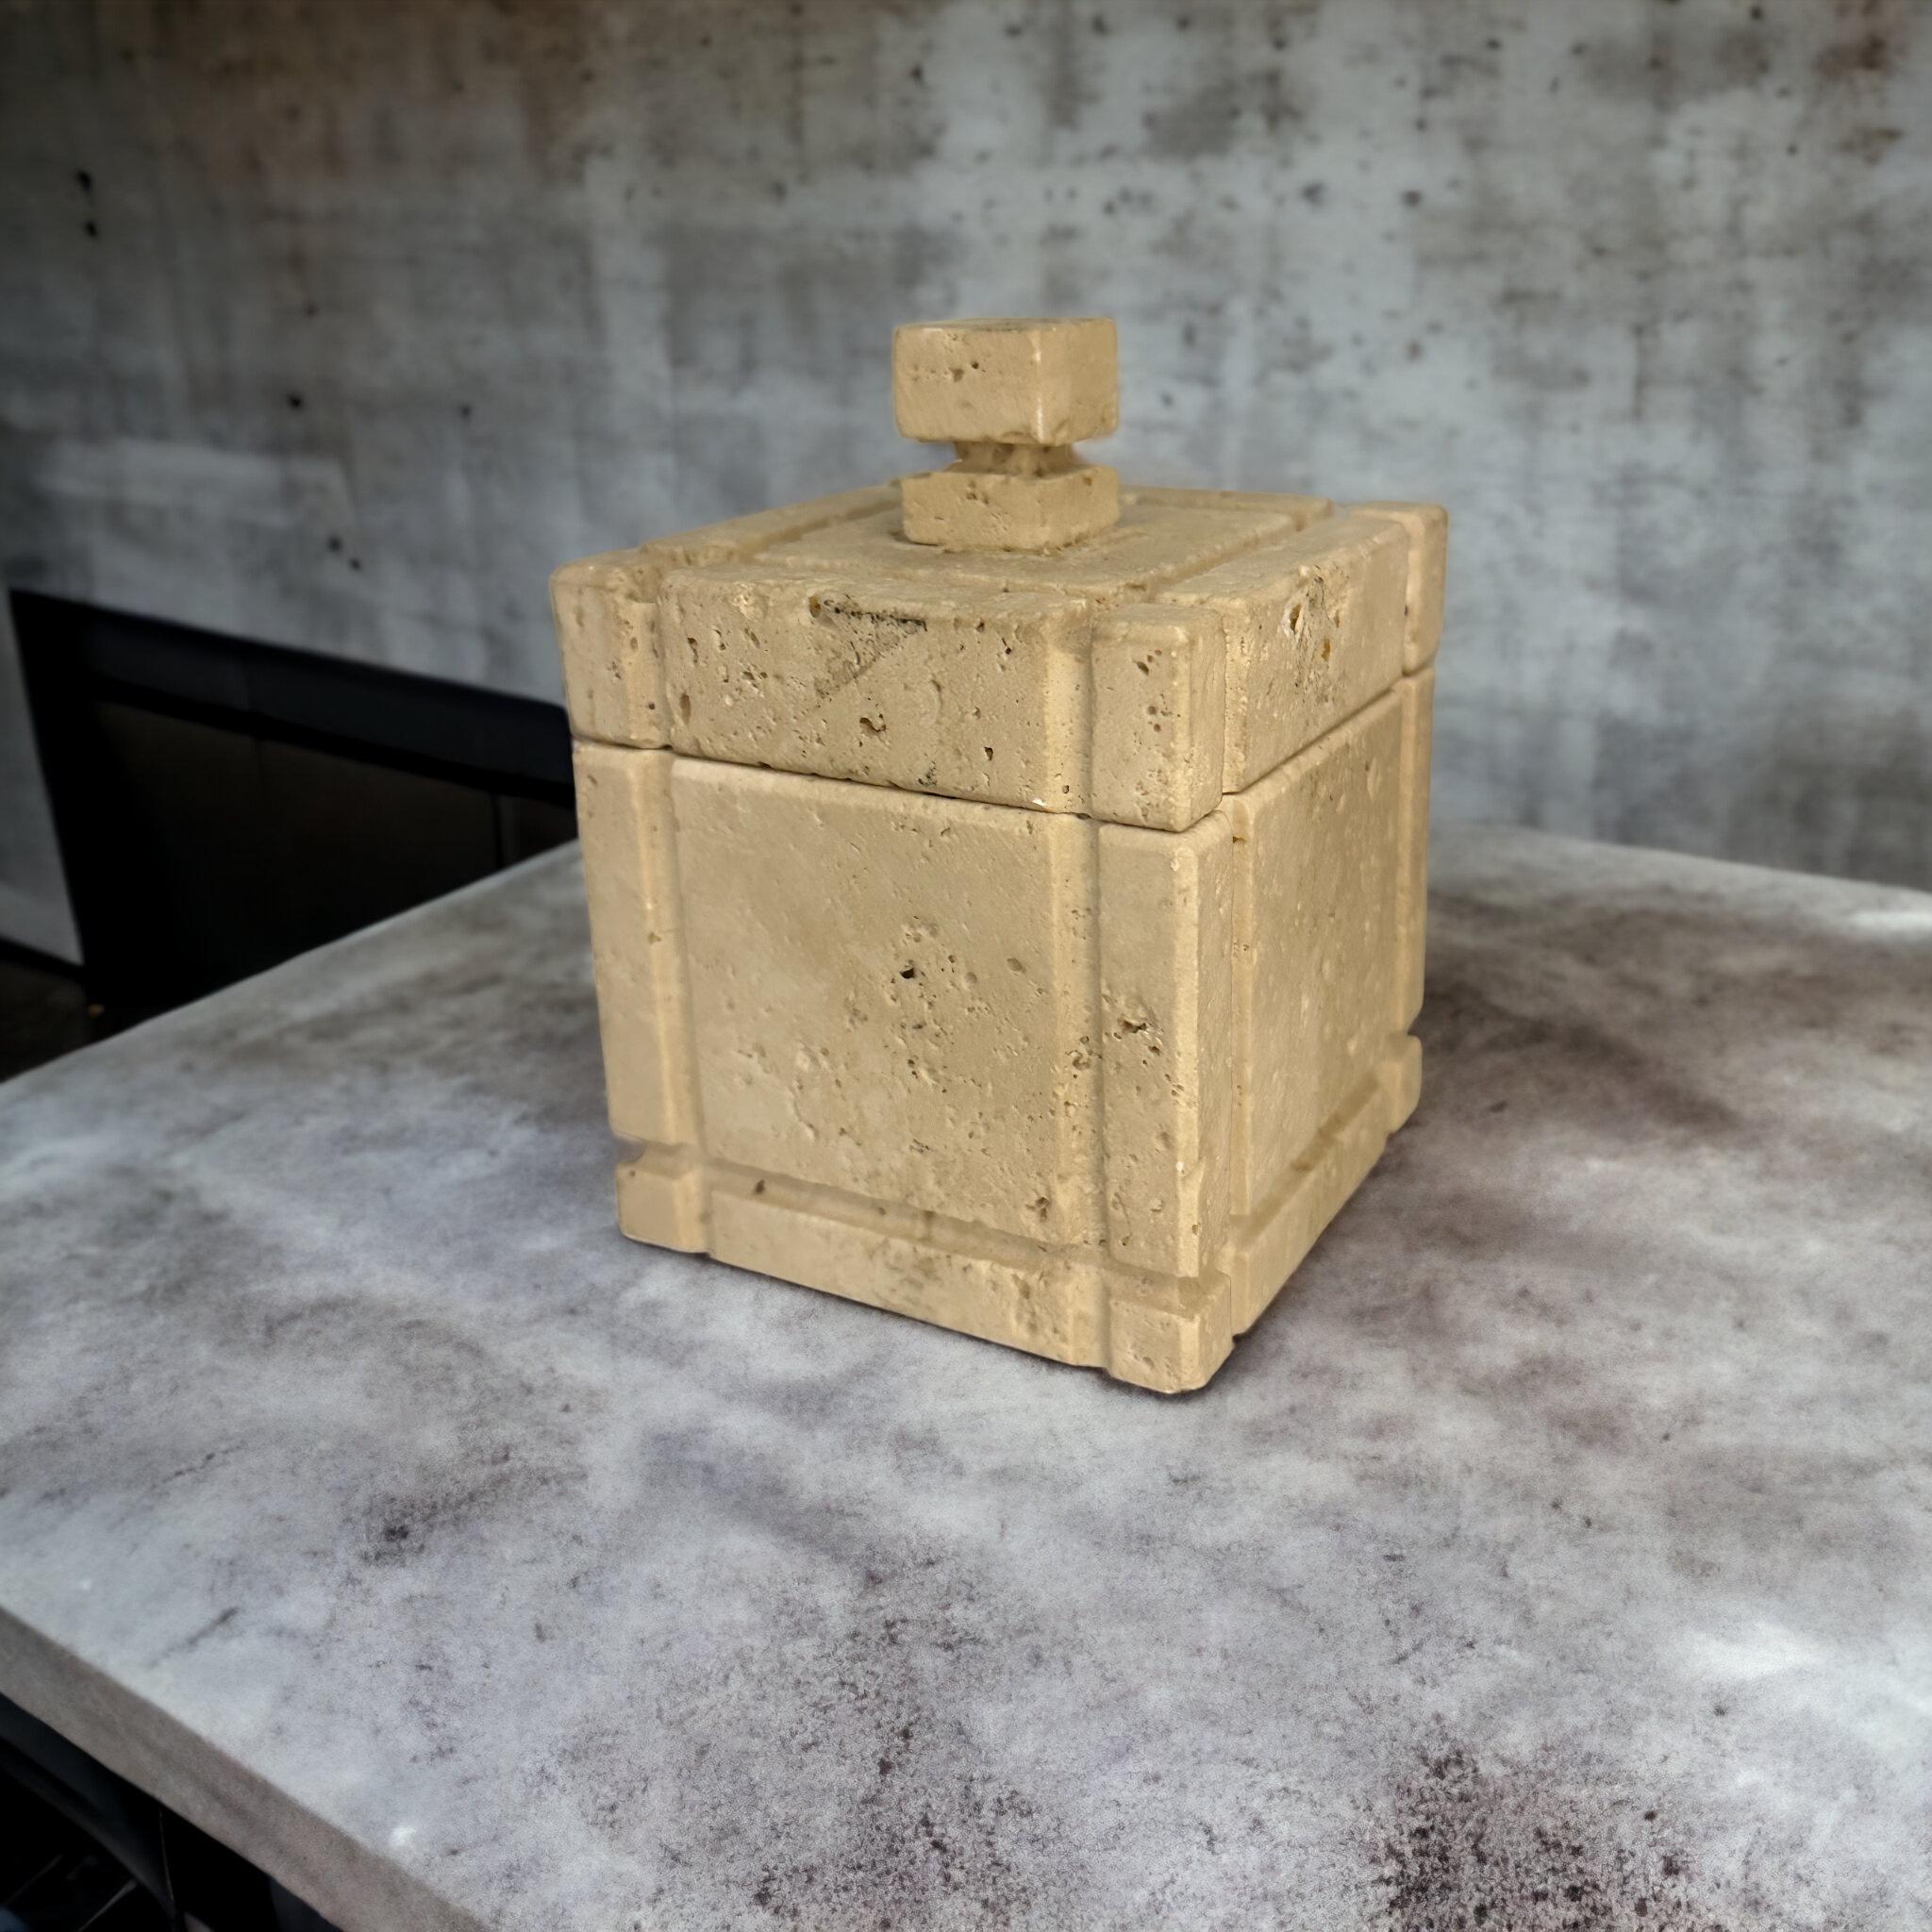 This beautiful square-shaped box in Travertine Marble is a wonderful example of Italian decorative objects production during the 1970s.  Made by Fratelli Manelli, the color and the texture of the marble, together with the pure and geometrical